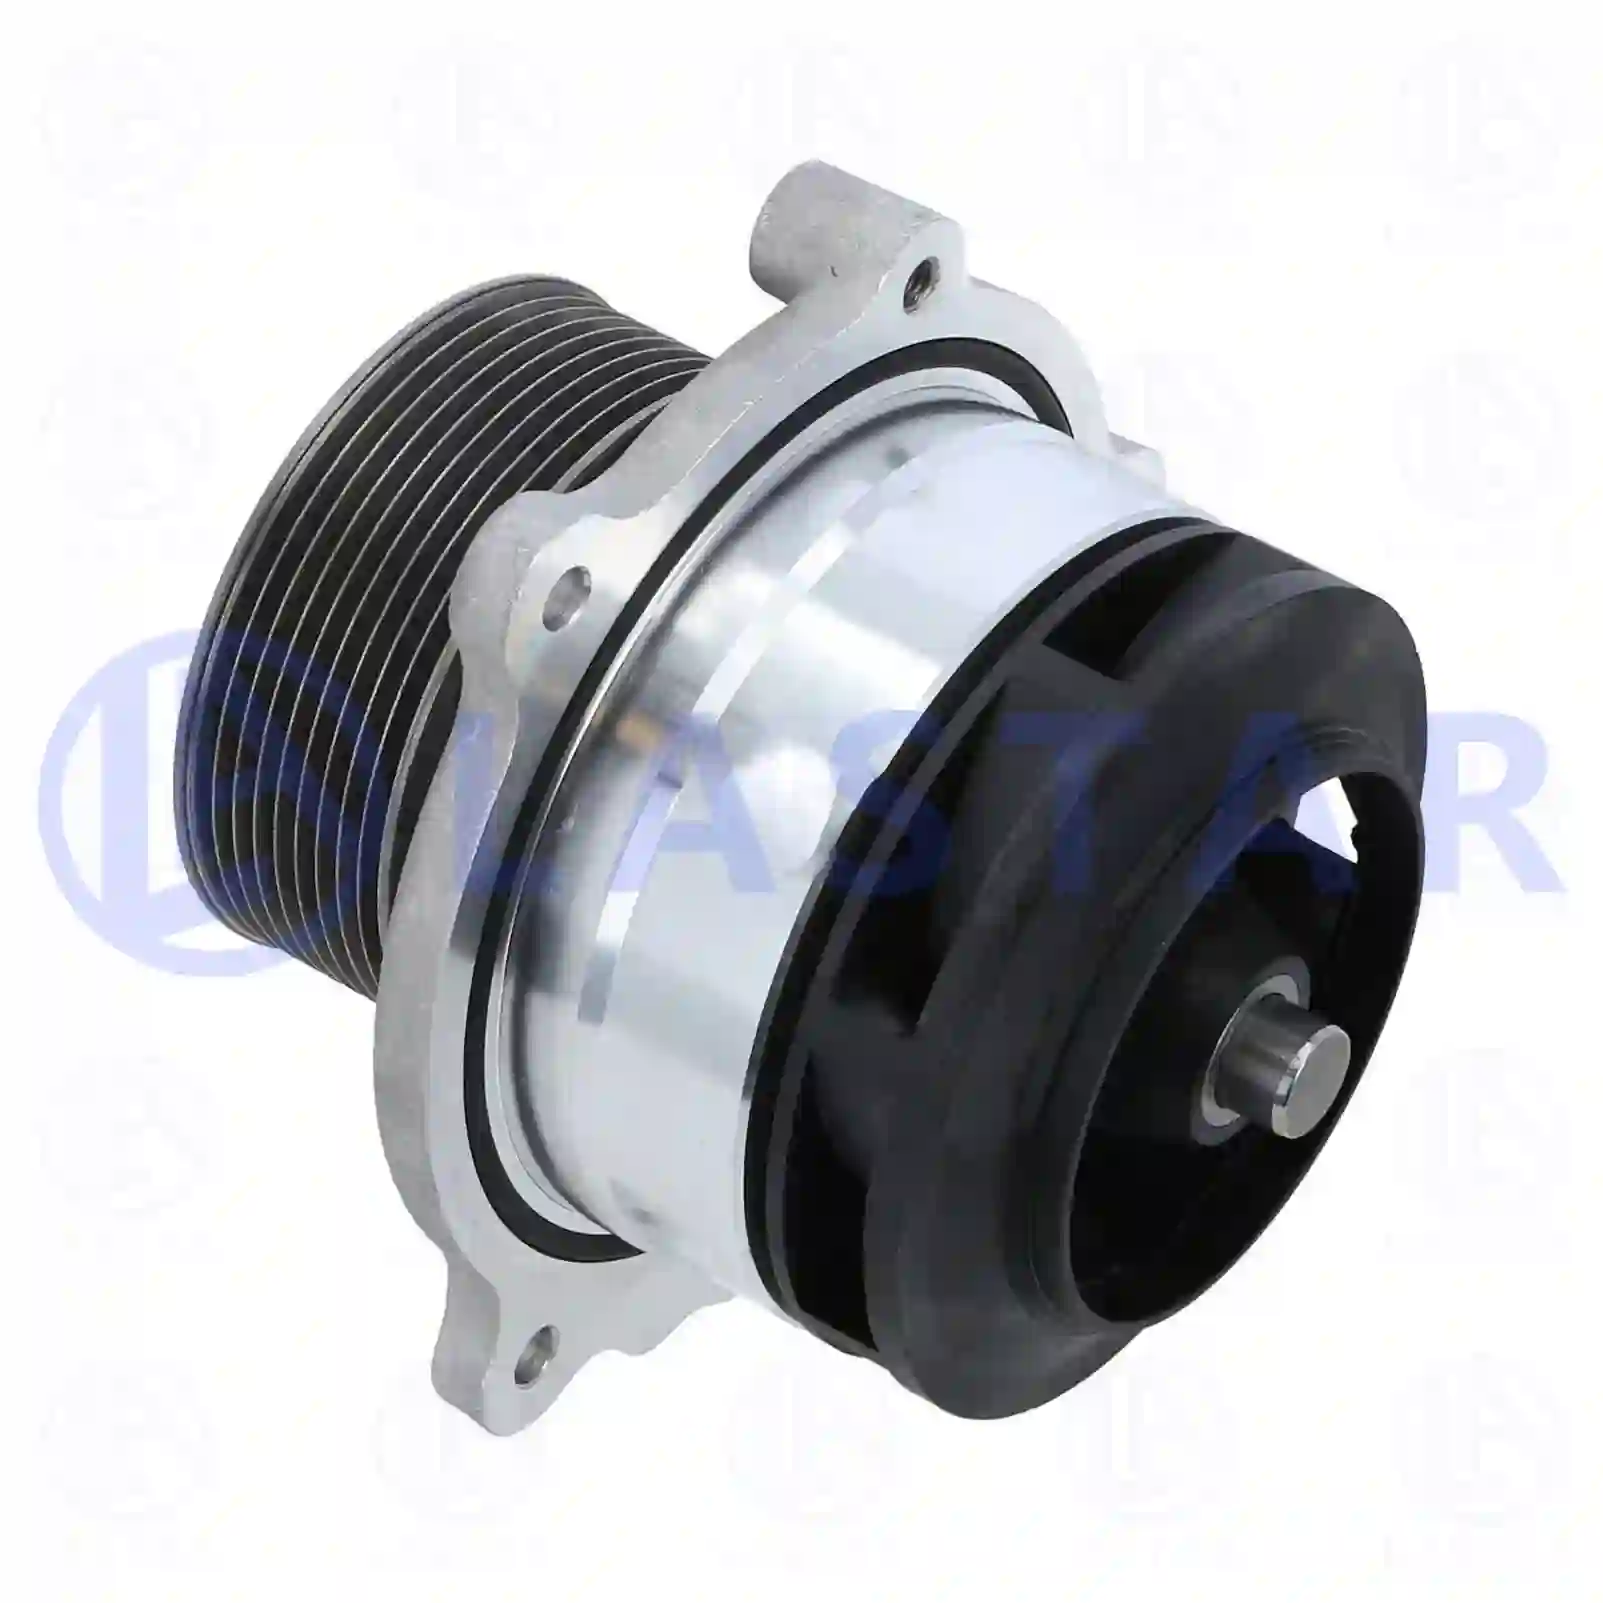 Water Pump Water pump, without water tank, la no: 77707431 ,  oem no:1639196, 1644762, 1649082, 1664762, 1664762A, 1664762R, 1738991, 1778280, 1778280A, 1778280R, 1828162, 1828162A, 1828162R, 1853299S, 1853300S, 931034, 931147, ZG00772-0008 Lastar Spare Part | Truck Spare Parts, Auotomotive Spare Parts